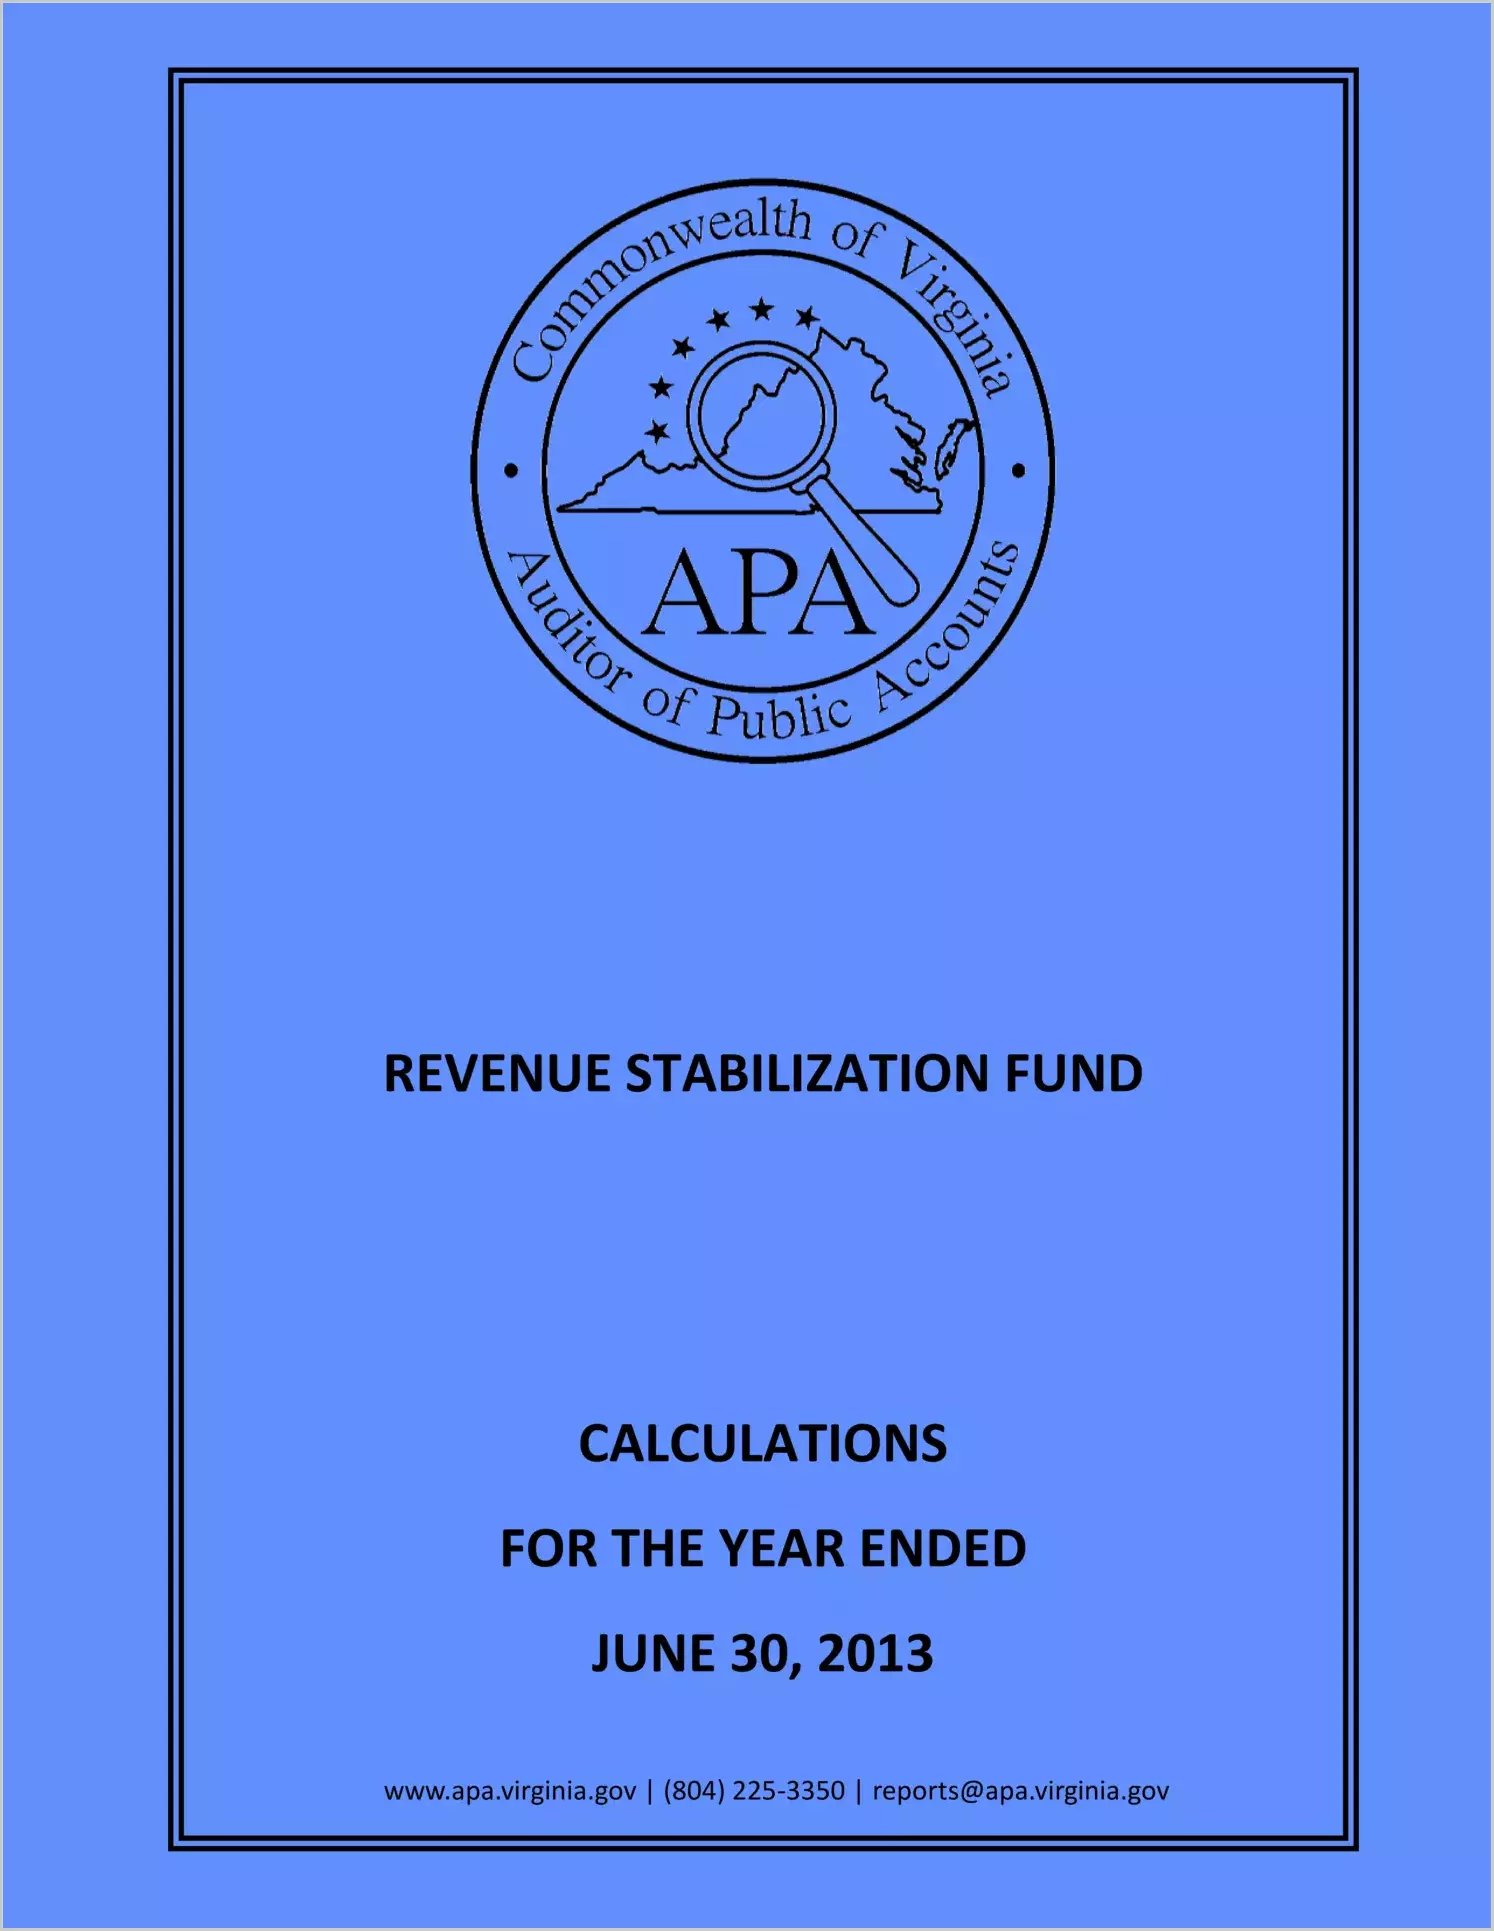 Revenue Stabilization Fund Calculations for the year ended June 30, 2013